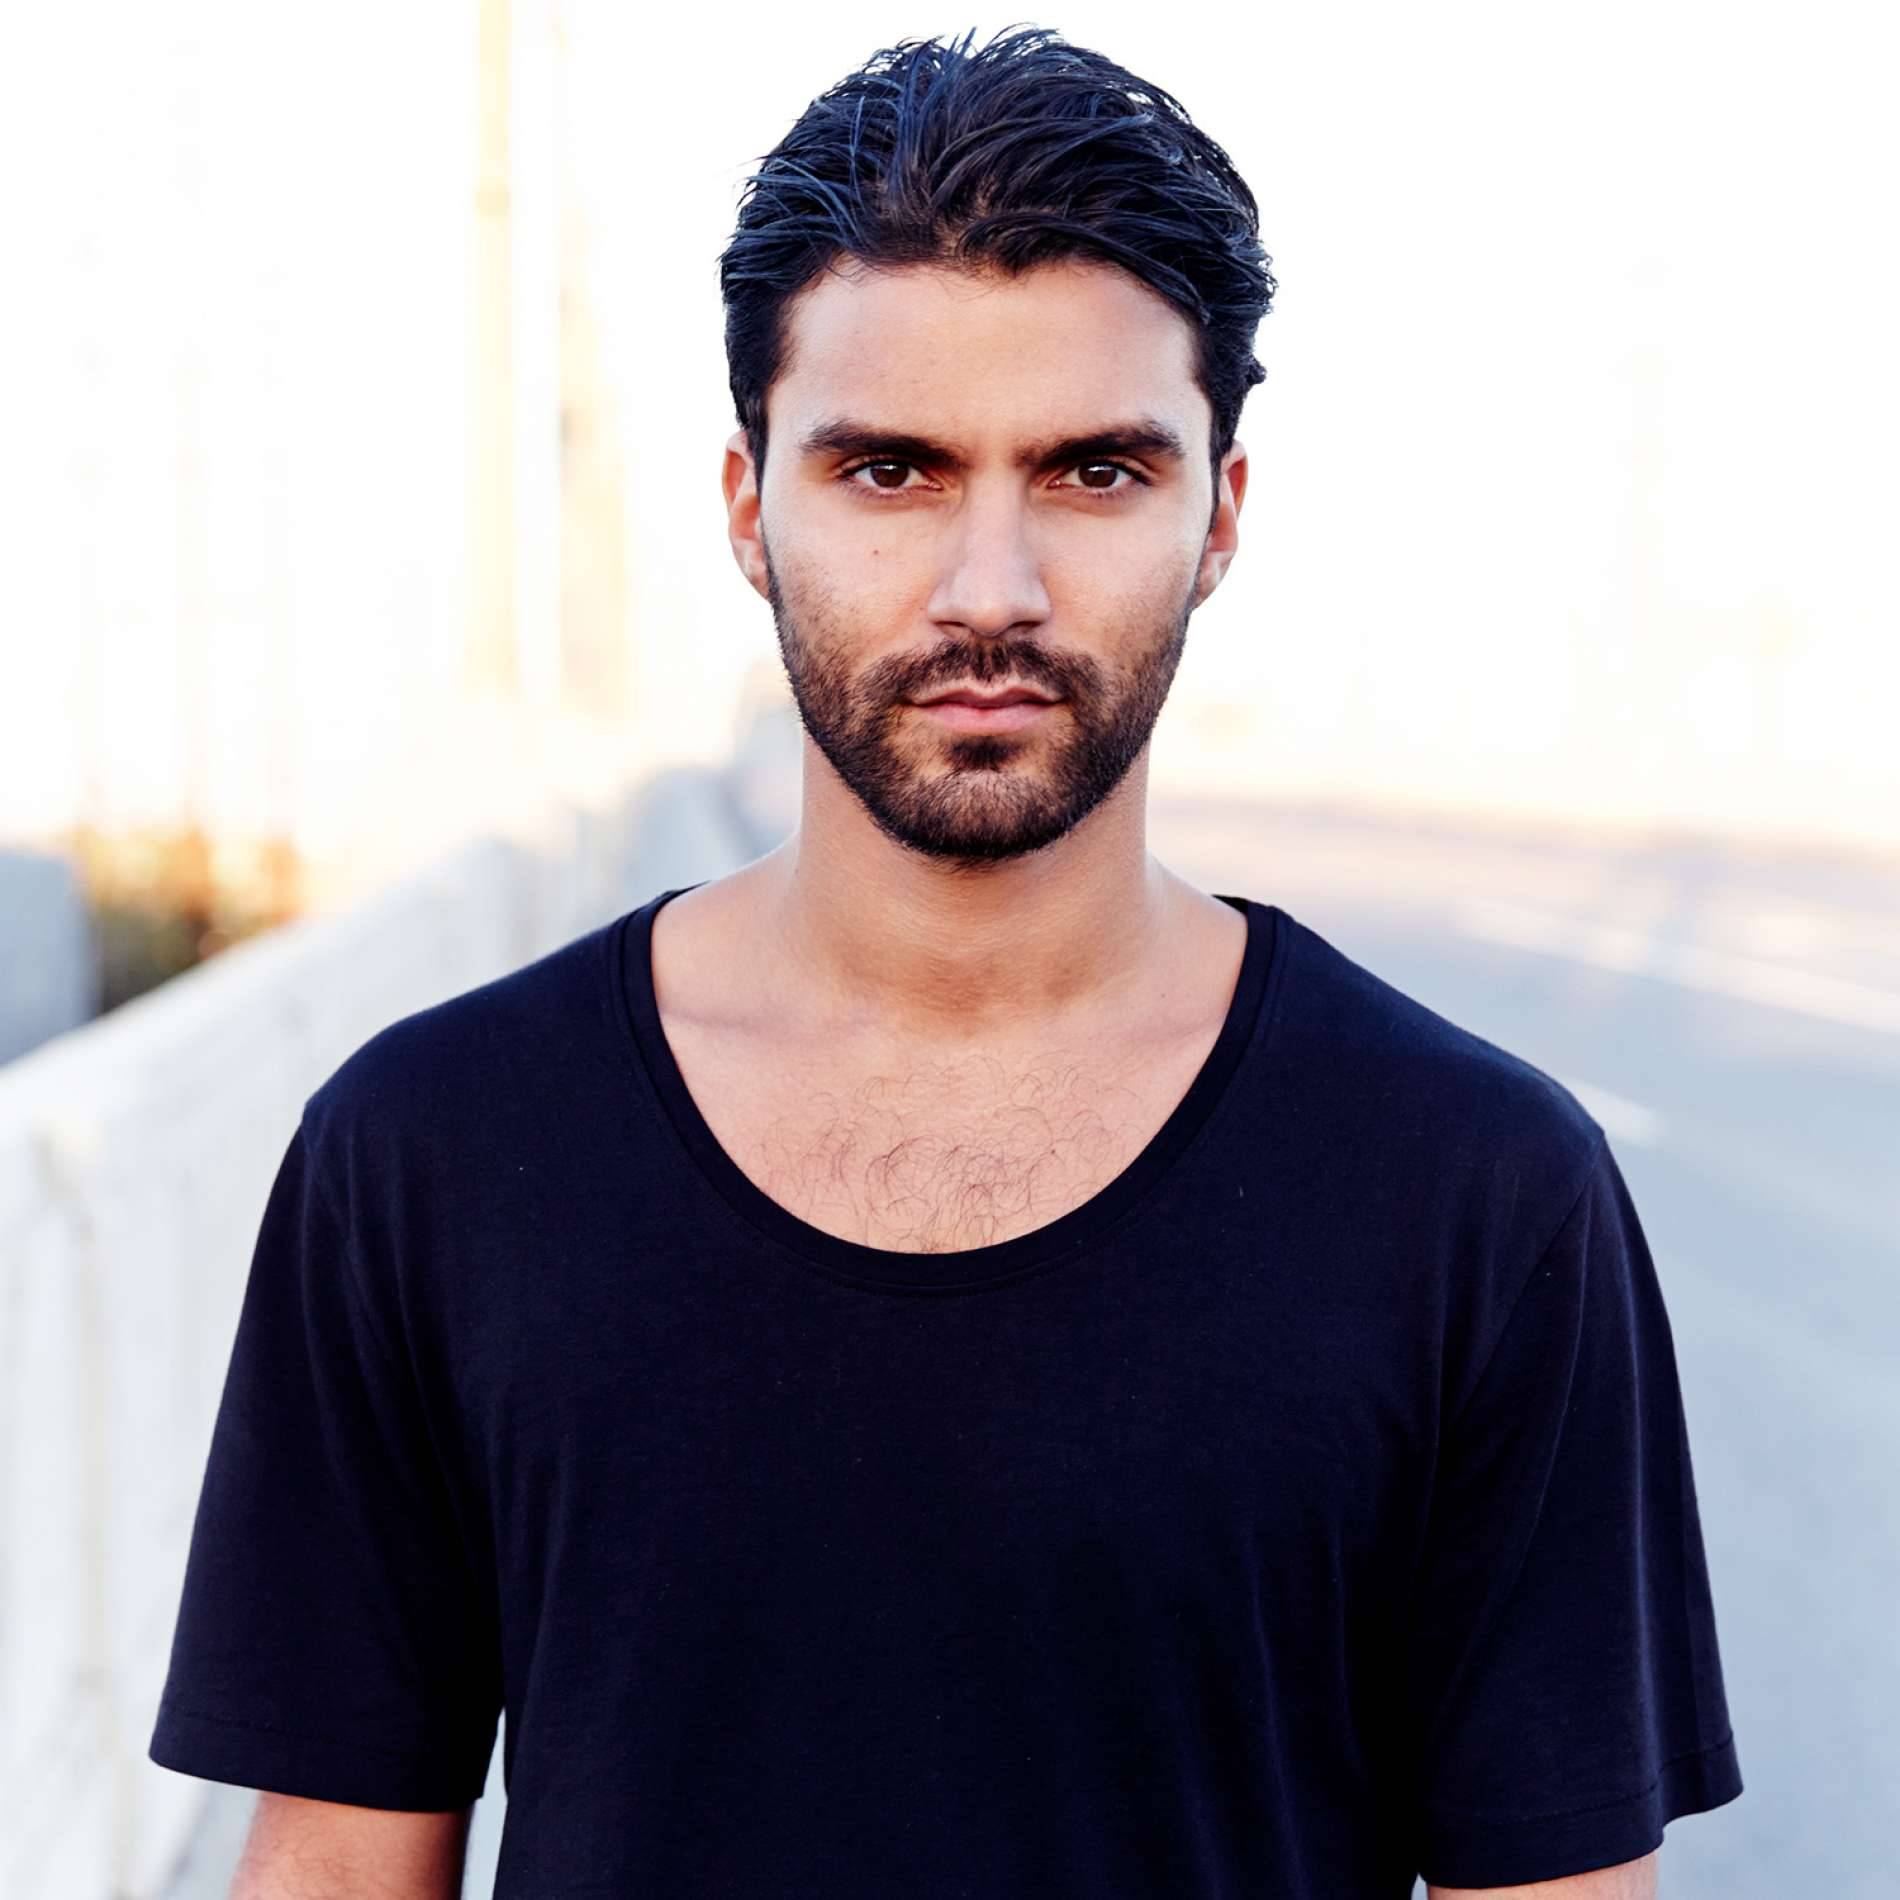 R3hab joins Spinnin' Sessions Miami